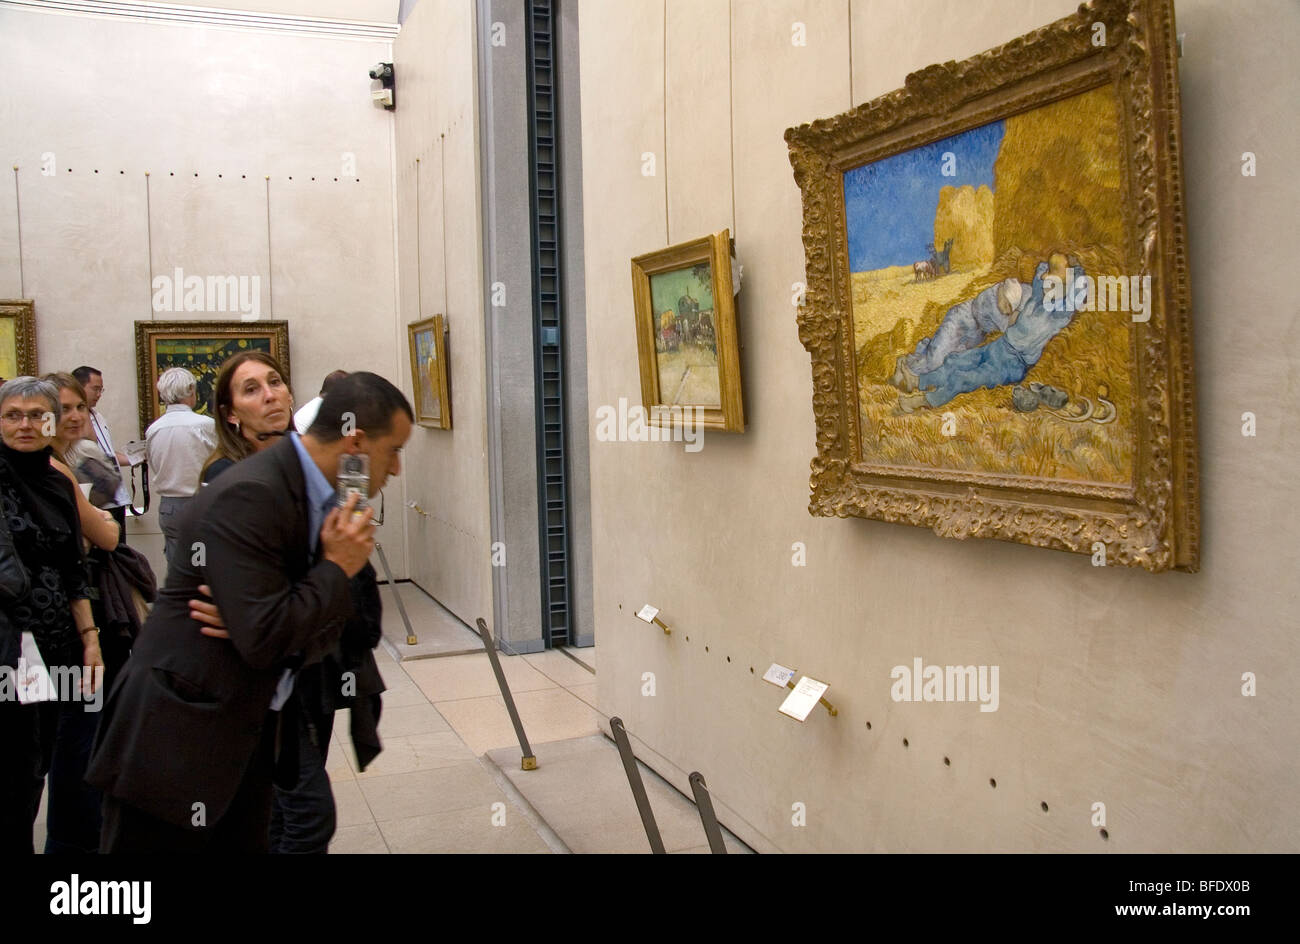 Visitors view artwork displayed in the Musee d'Orsay, Paris, France. Stock Photo